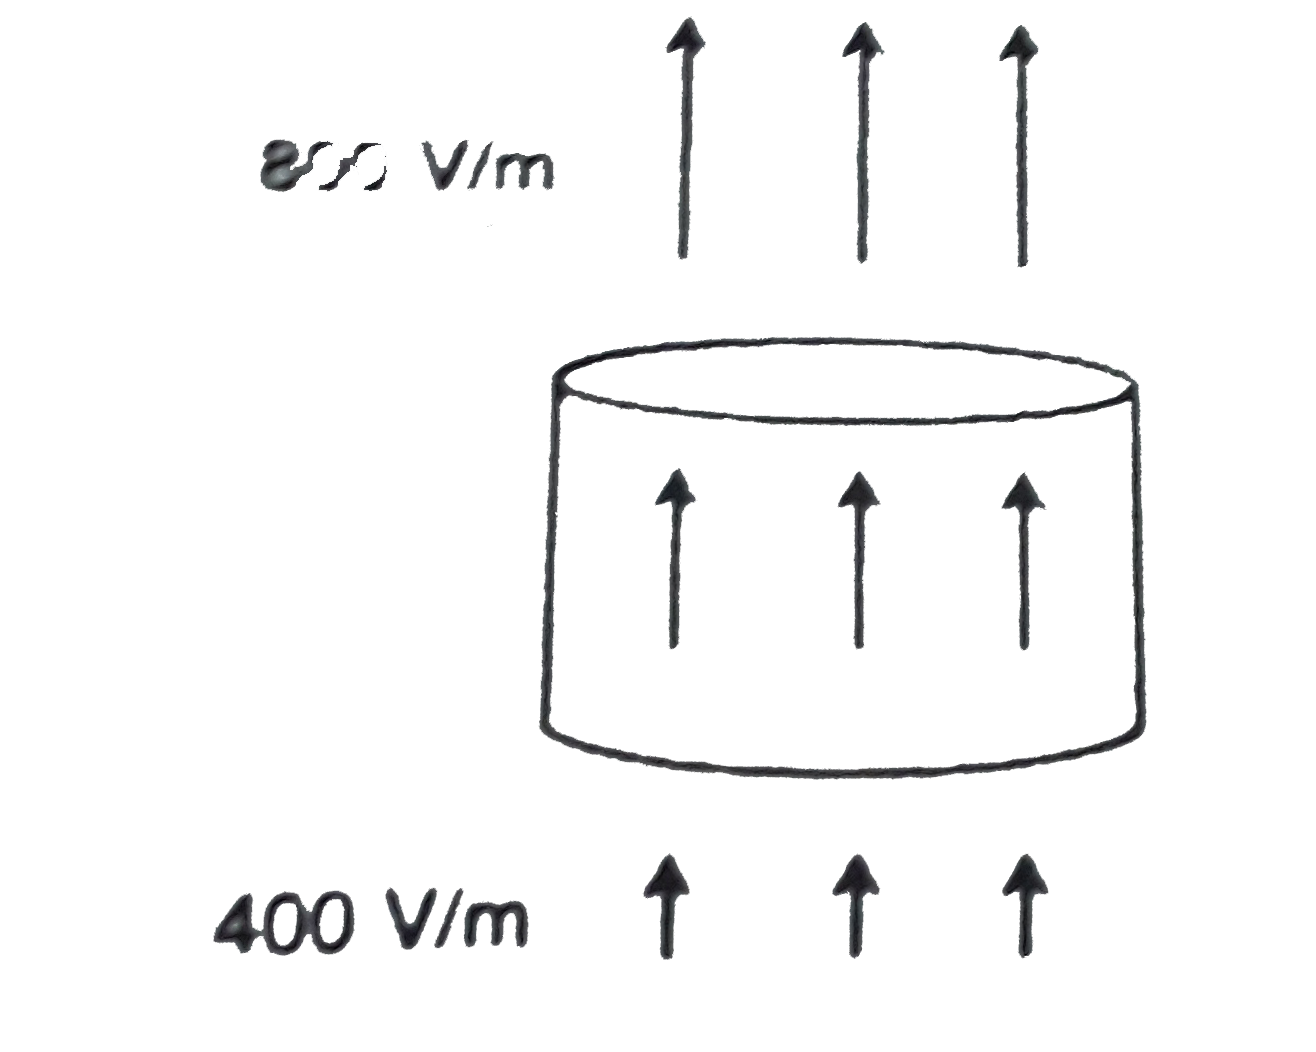 A cylinder on whose surfaces there is a vertical electric field of varying magnitude as shown. The electric field is uniform on the top surface as well as on the bottom surface therefore, this cylinder encloses